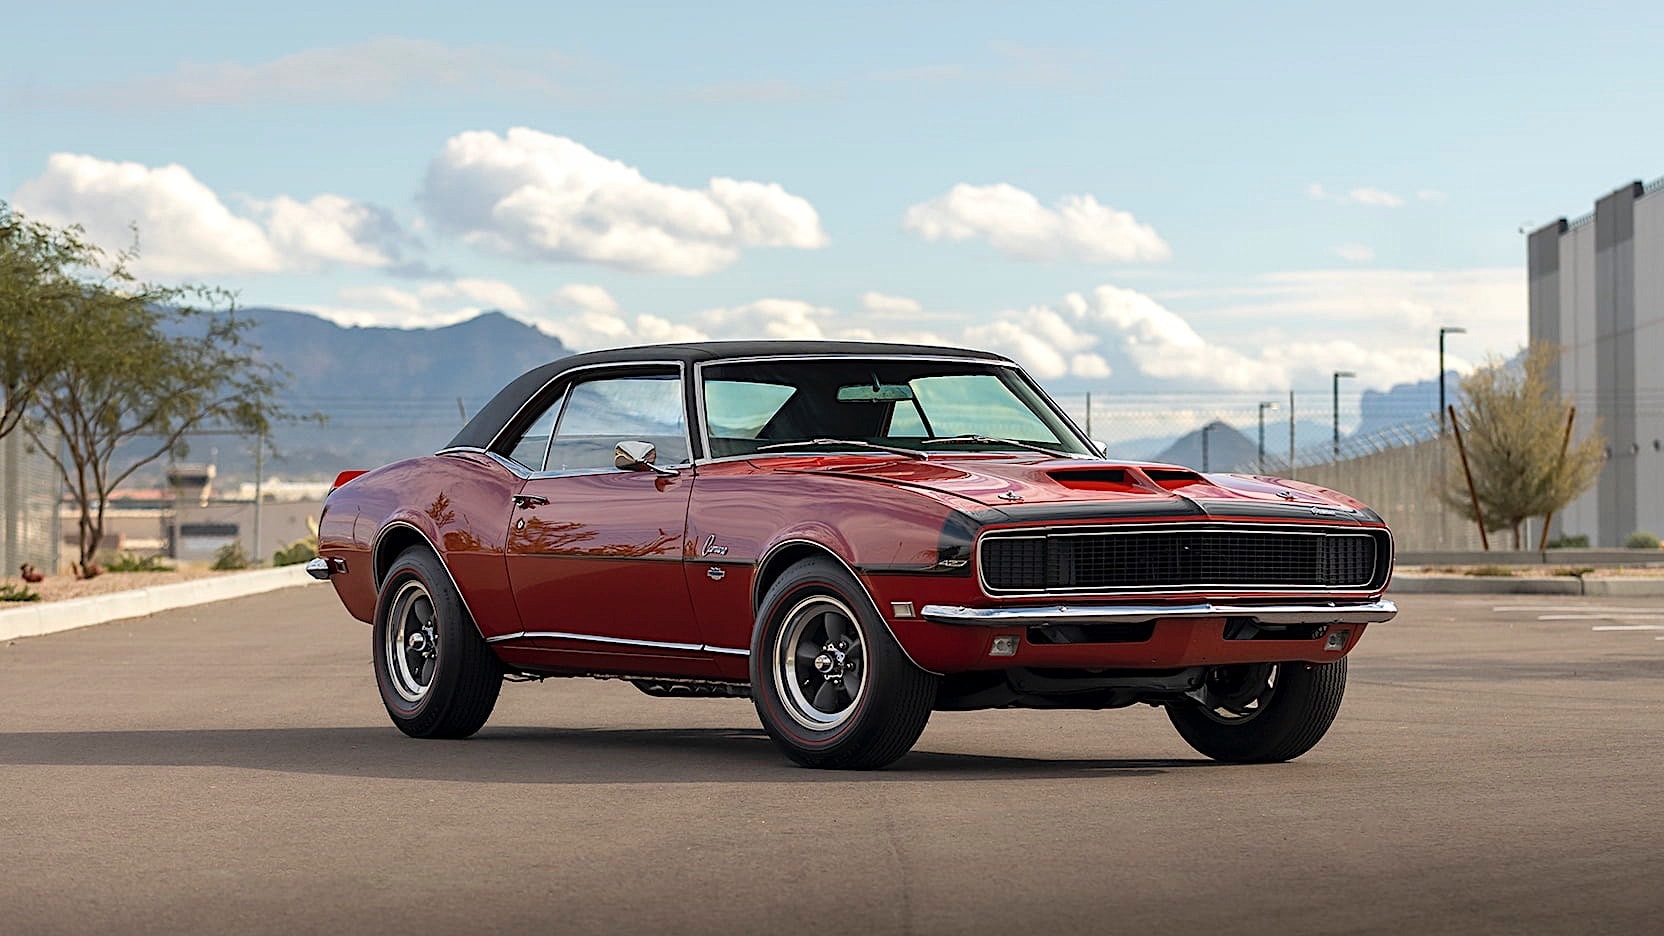 1968 Chevrolet Yenko Camaro Rsss Kept Out Of Sight For 42 Years Packs